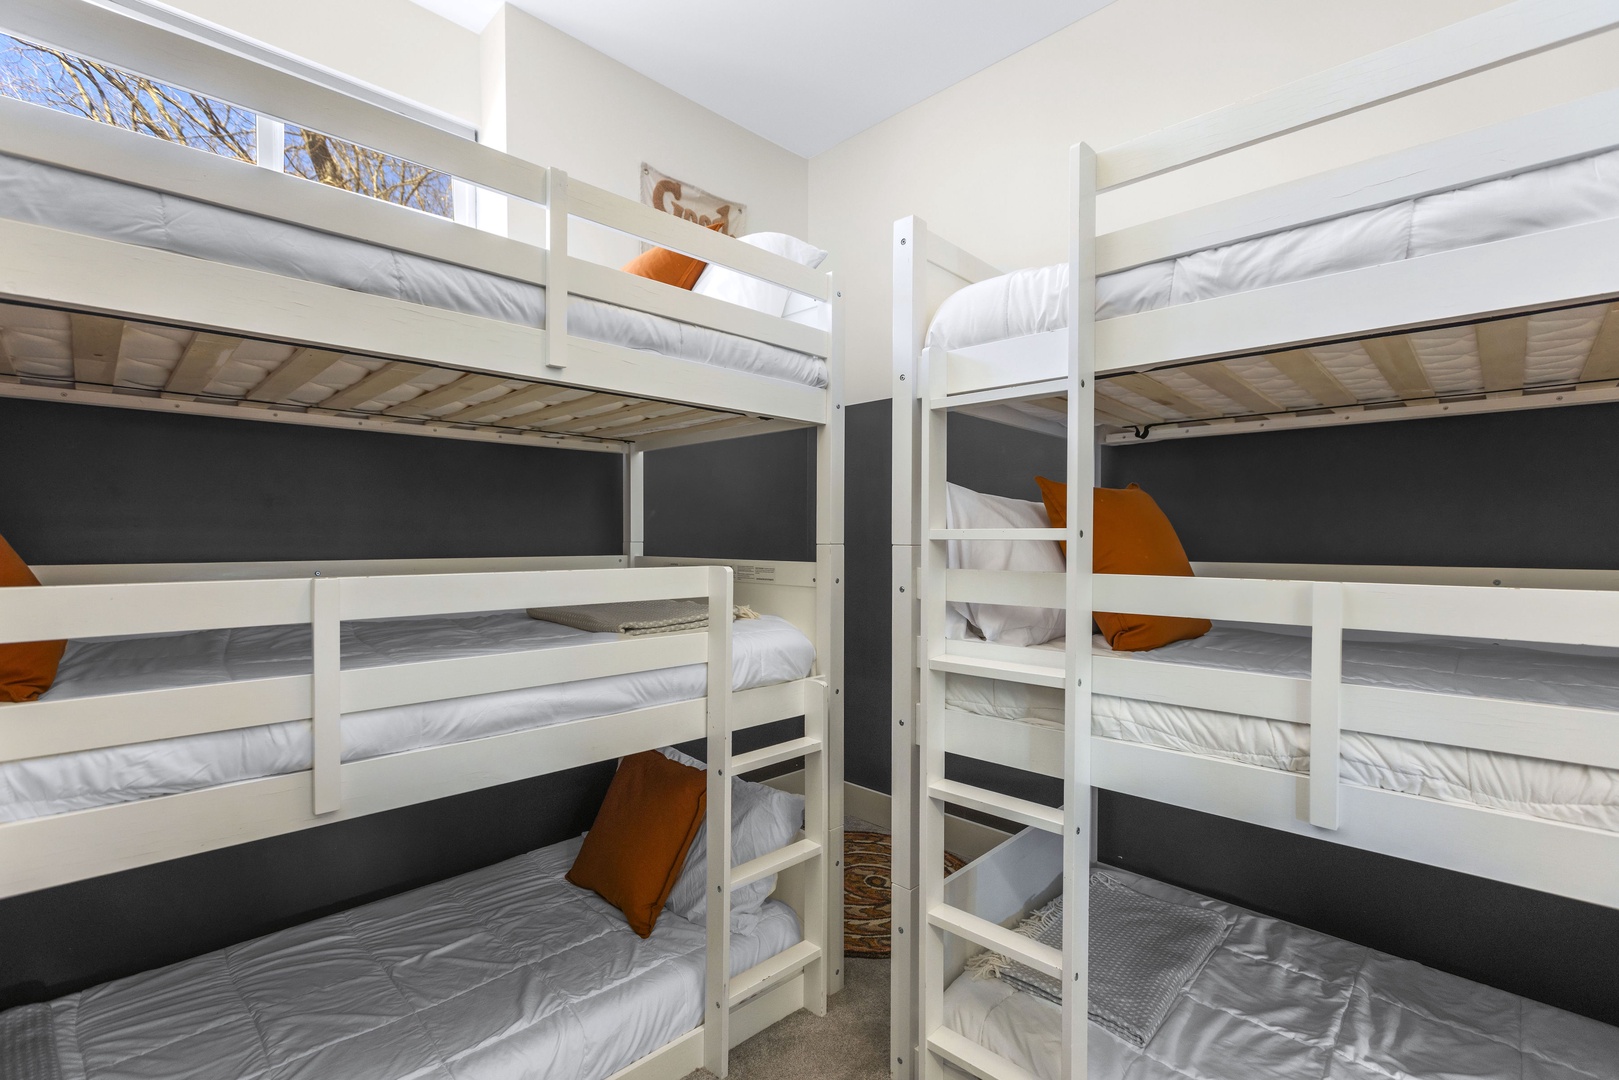 The second bedroom includes a pair of triple twin bunkbeds